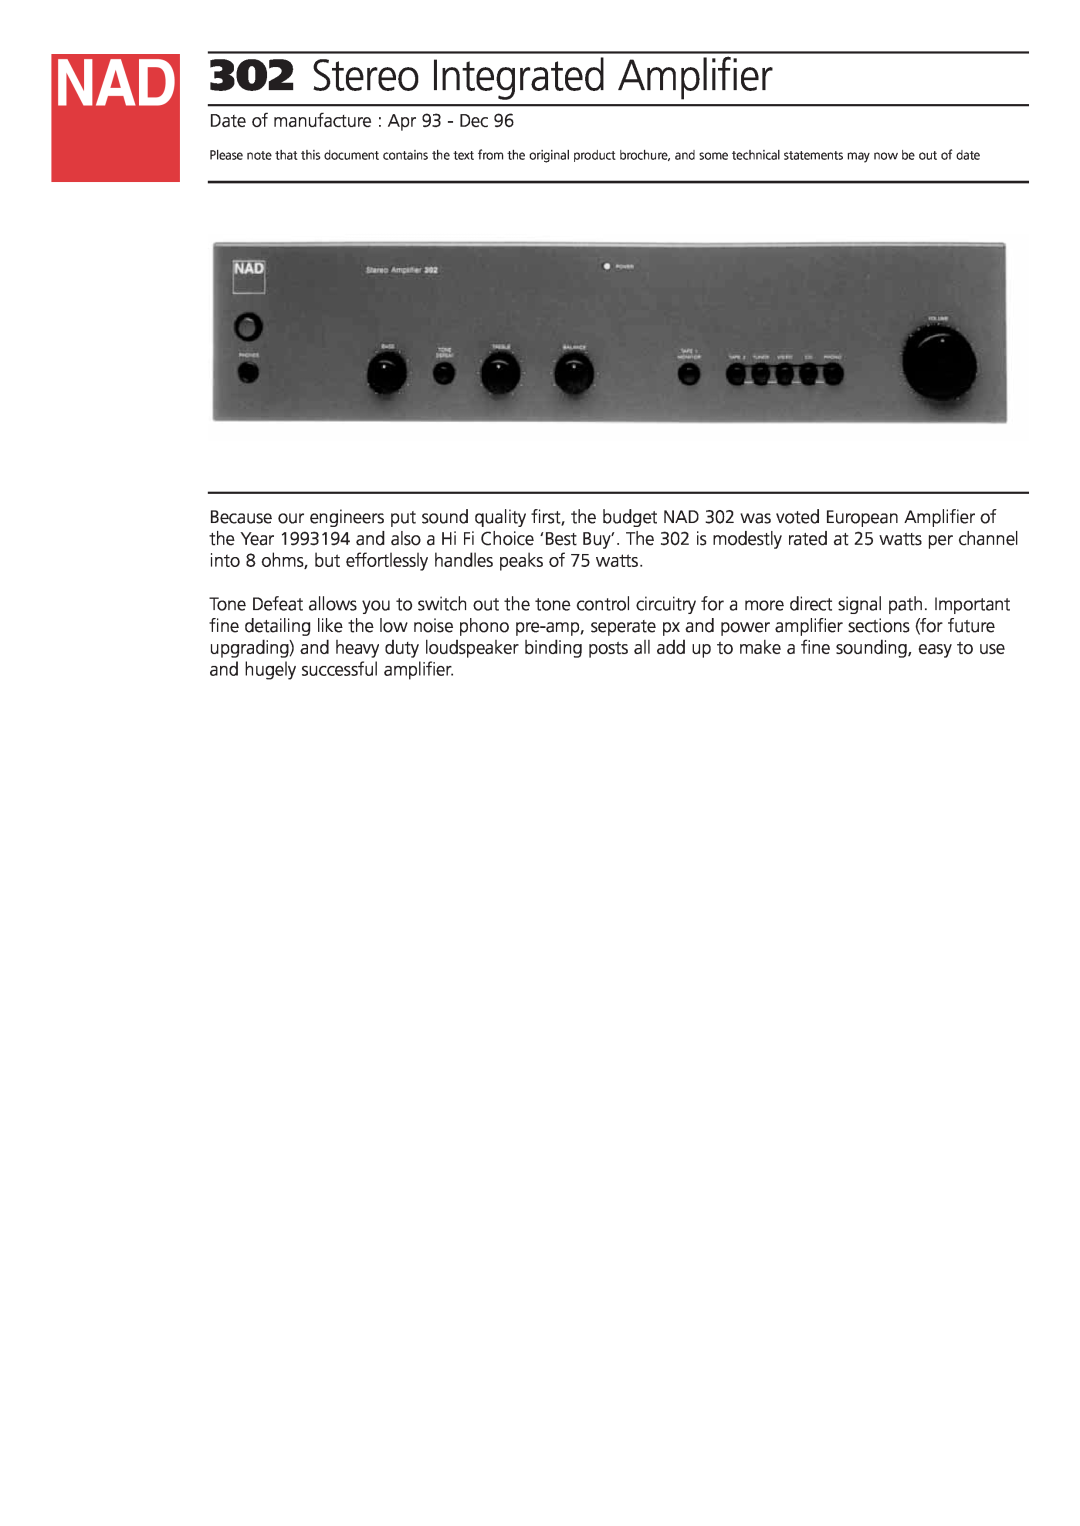 NAD brochure 302Stereo Integrated Amplifier 